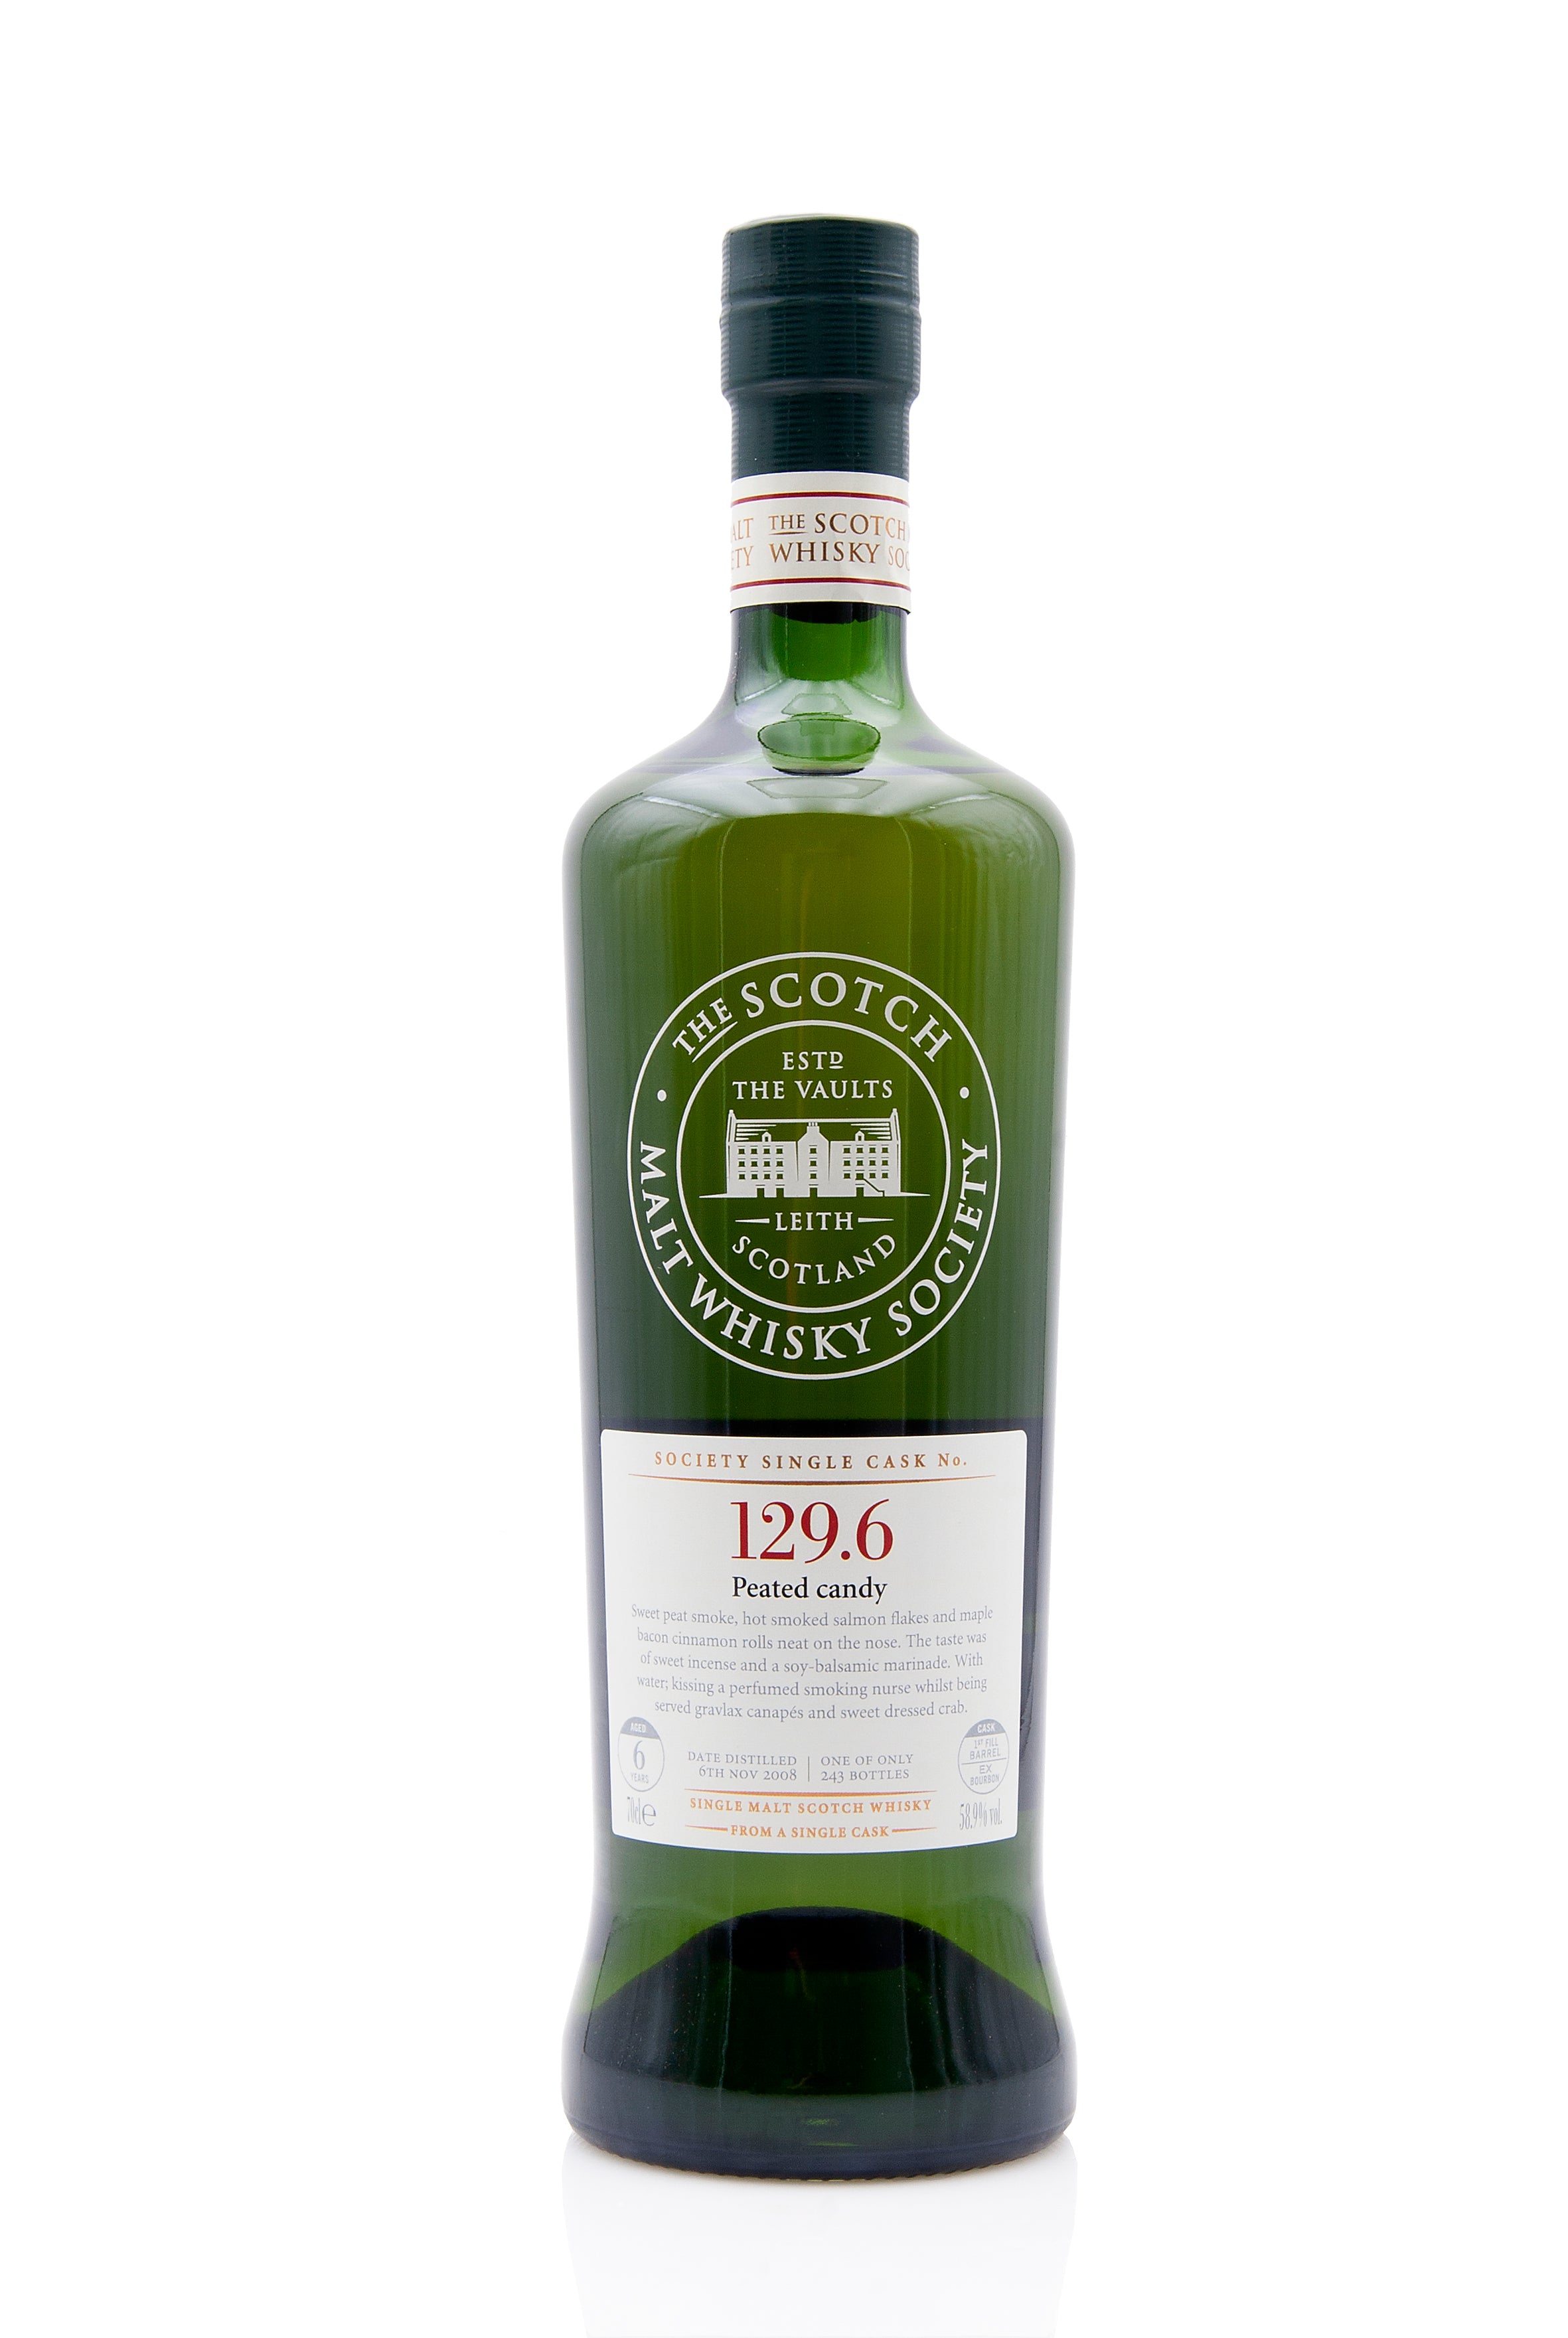 Kilchoman 6 Year Old - 2008 | 'Peated Candy' SMWS 129.6